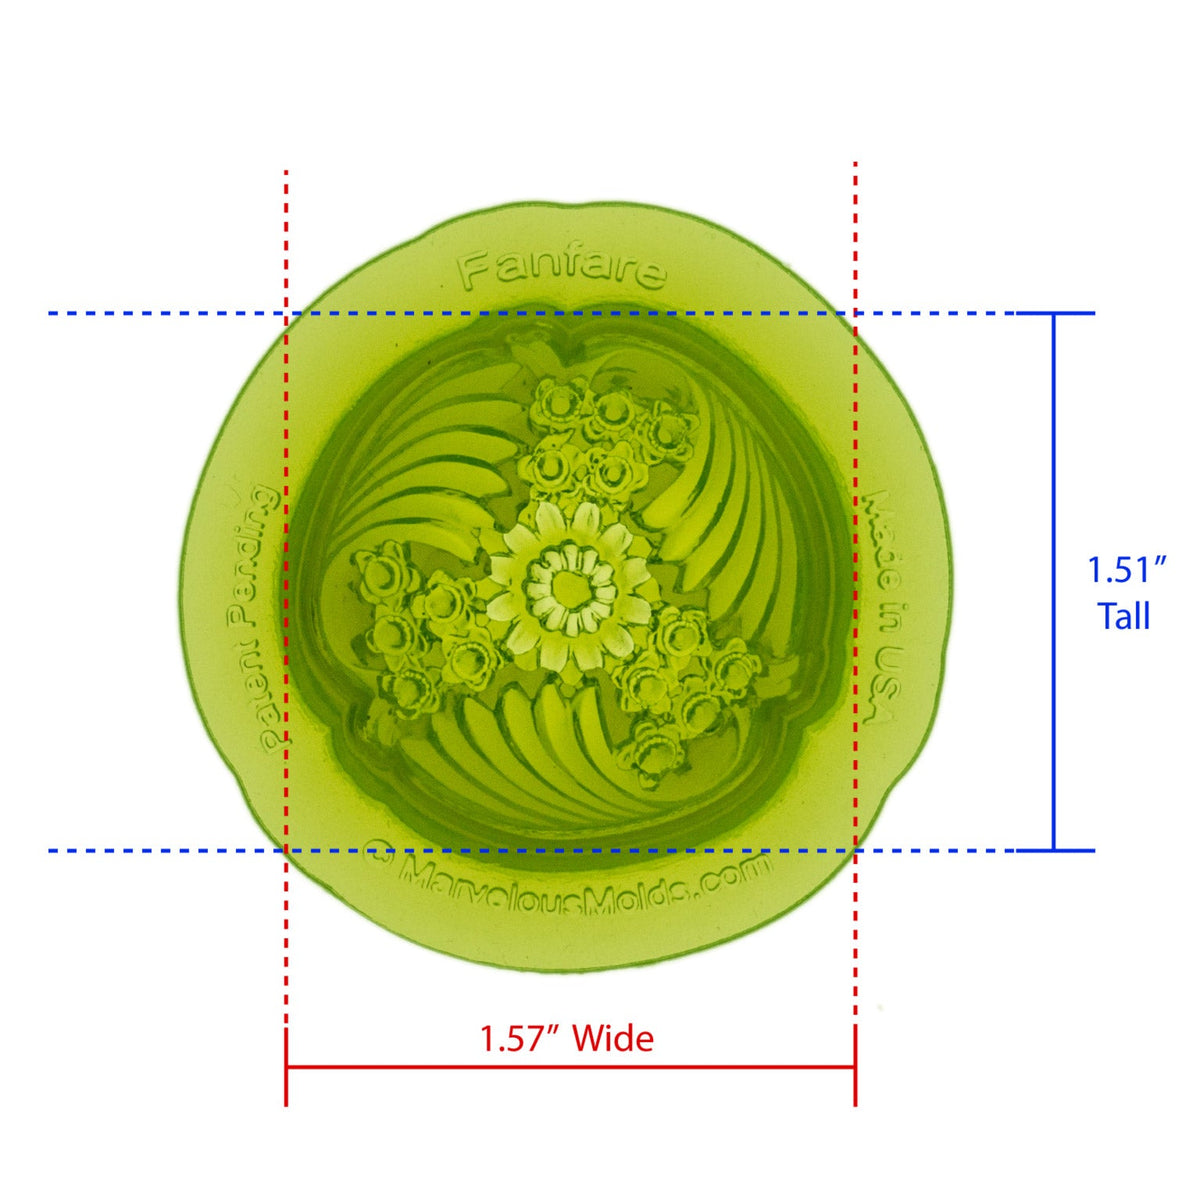 Fanfare Floral Medallion Silicone Mold Cavity measures 1.57 inches Wide by 1.51 inches Tall, proudly Made in USA